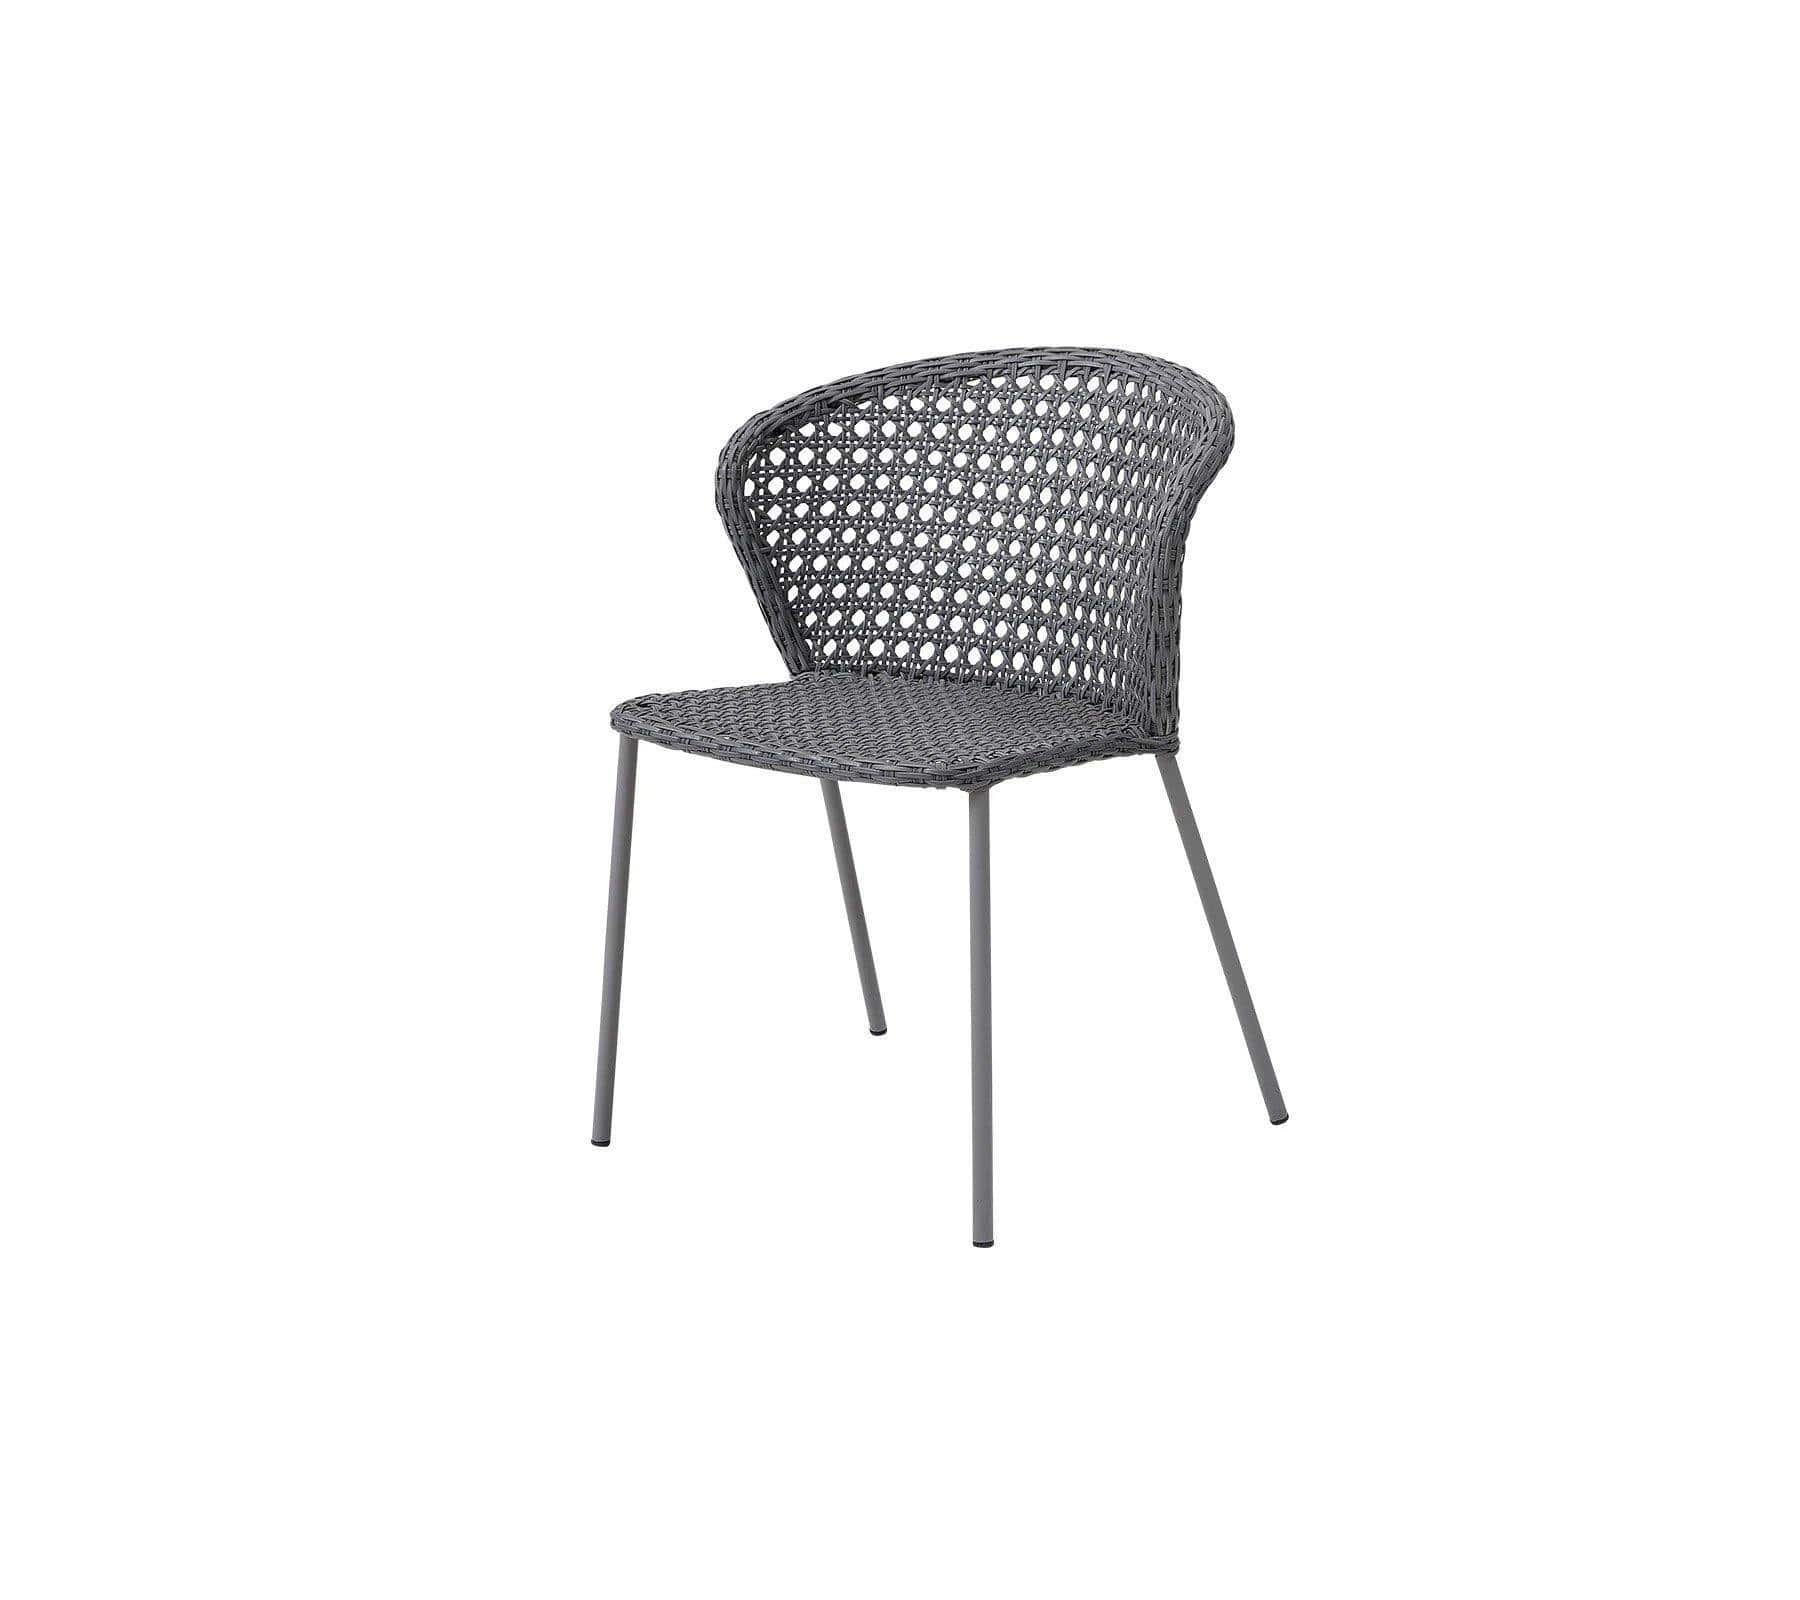 Cane-Line Denmark Outdoor Chairs Lean chair, stackable, Cane-line French Weave